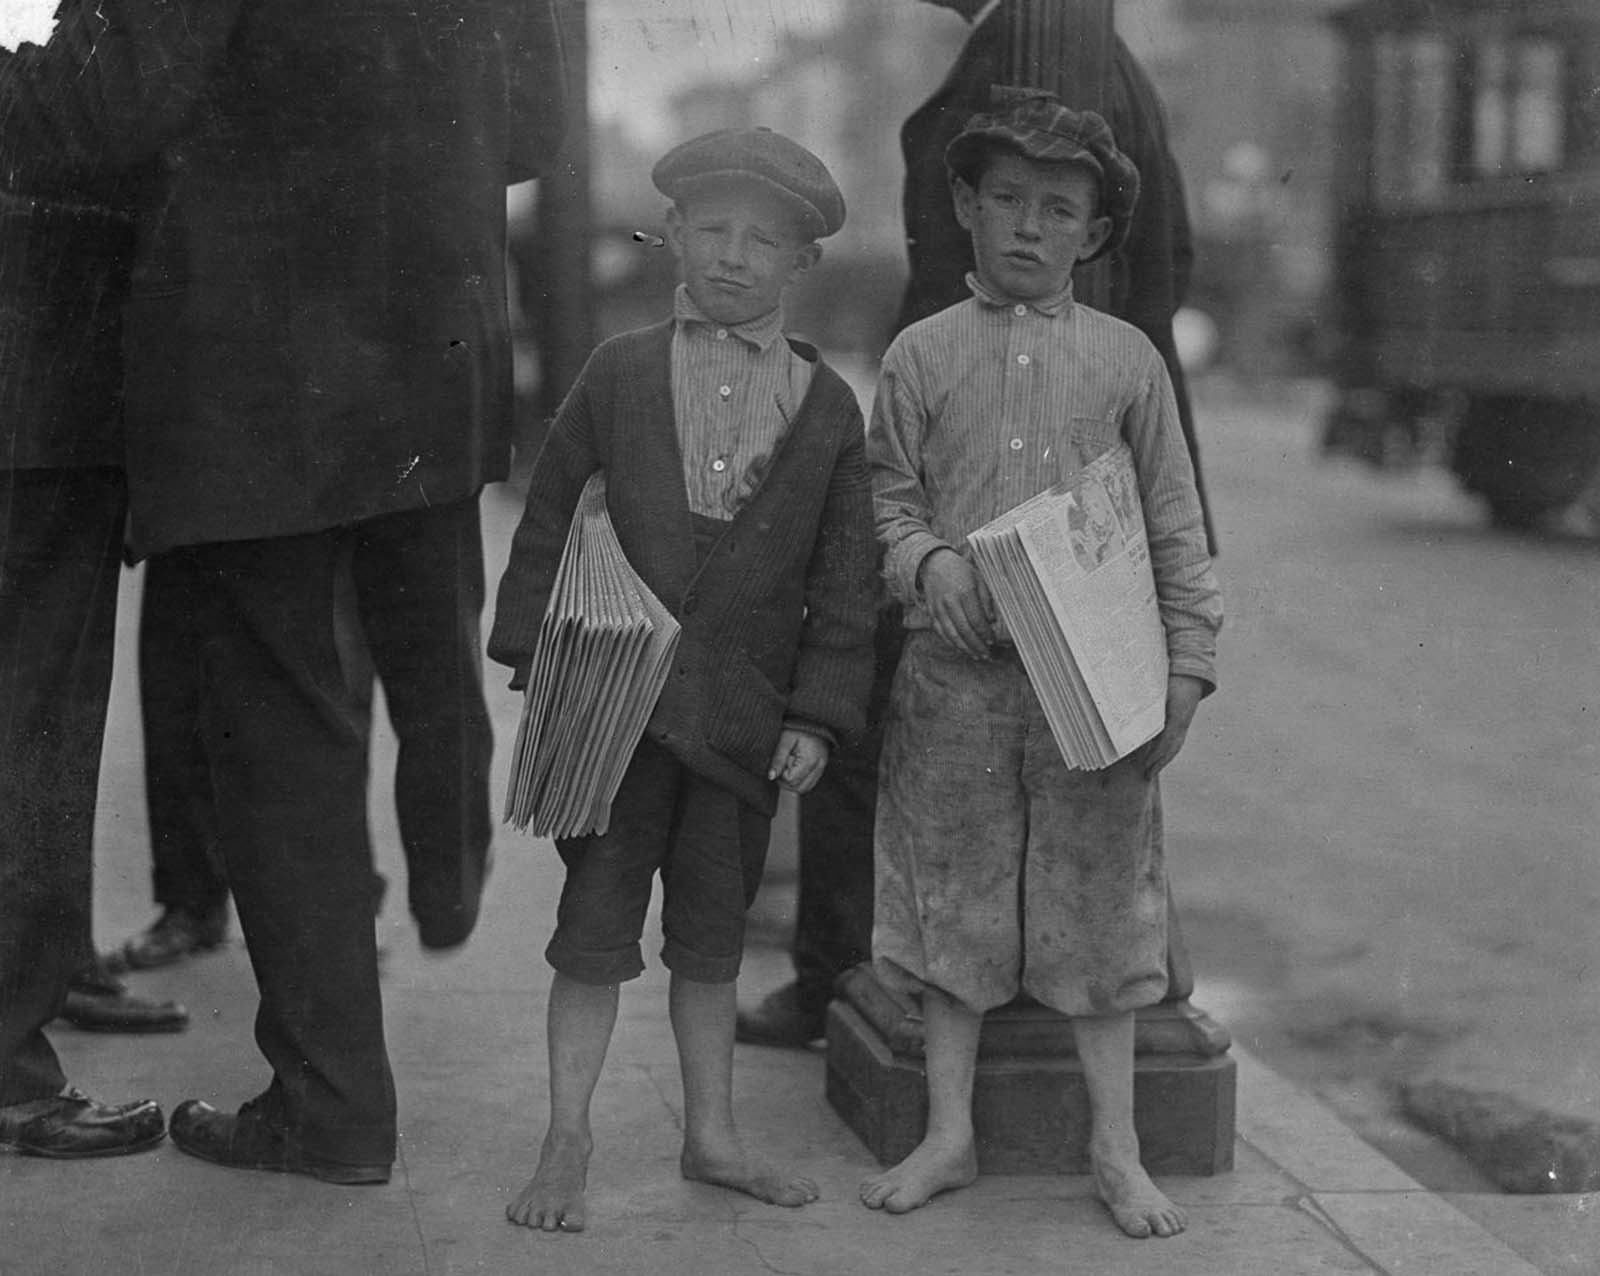 Nine-year-old newsie and his seven-year-old brother Red. Tough specimen of Los Angeles newsboys. Los Angeles, California, 1915.